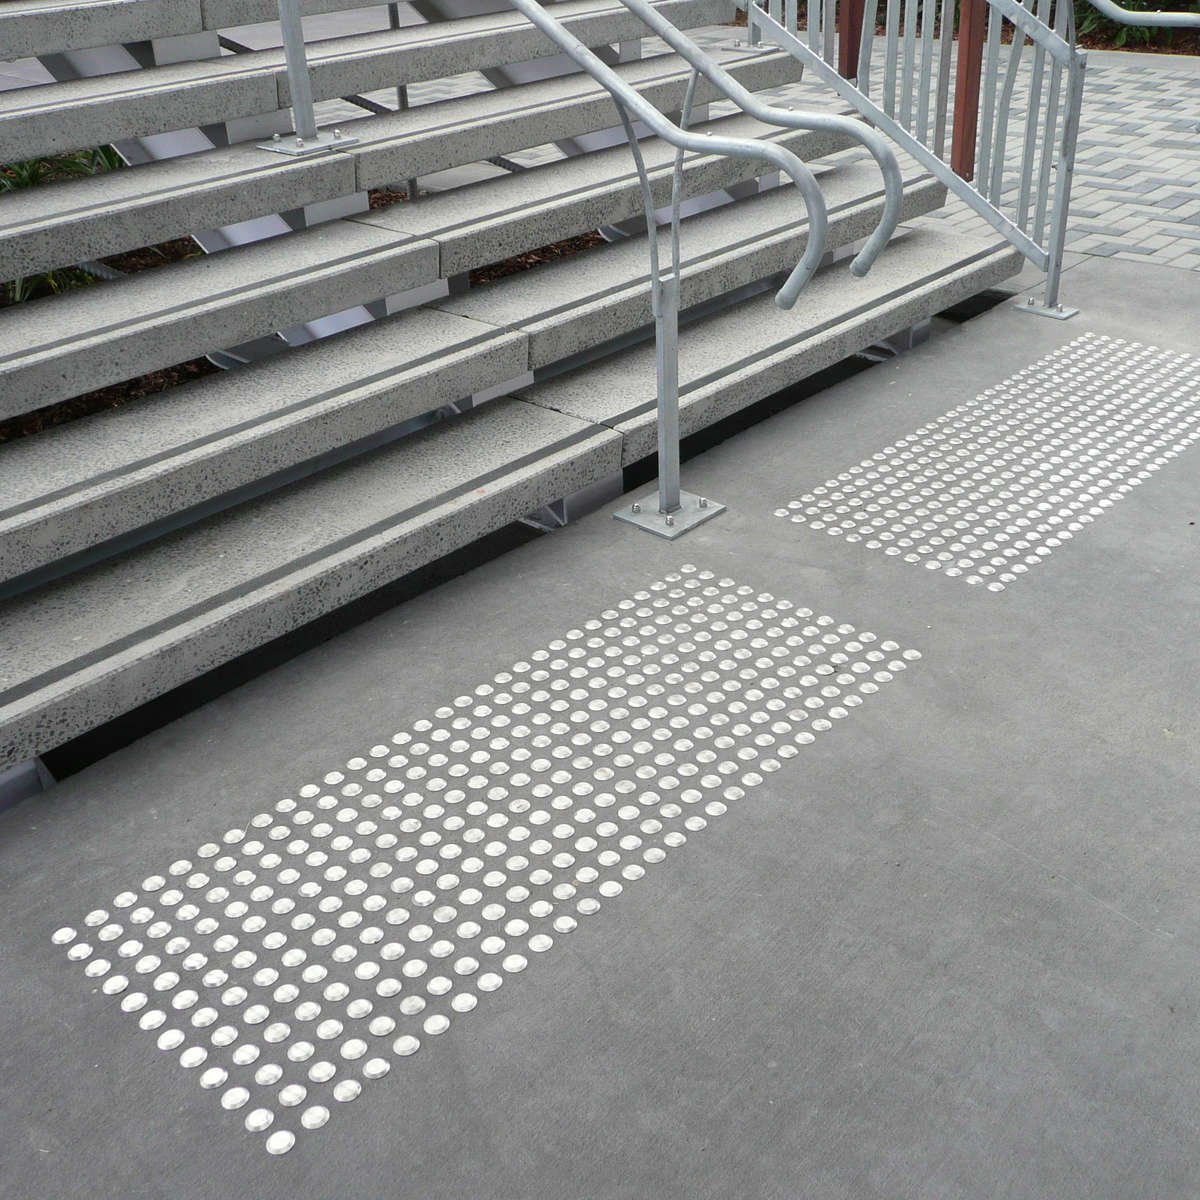 TacPro stainless steel tactile indicators on concrete at the bottom of stairs